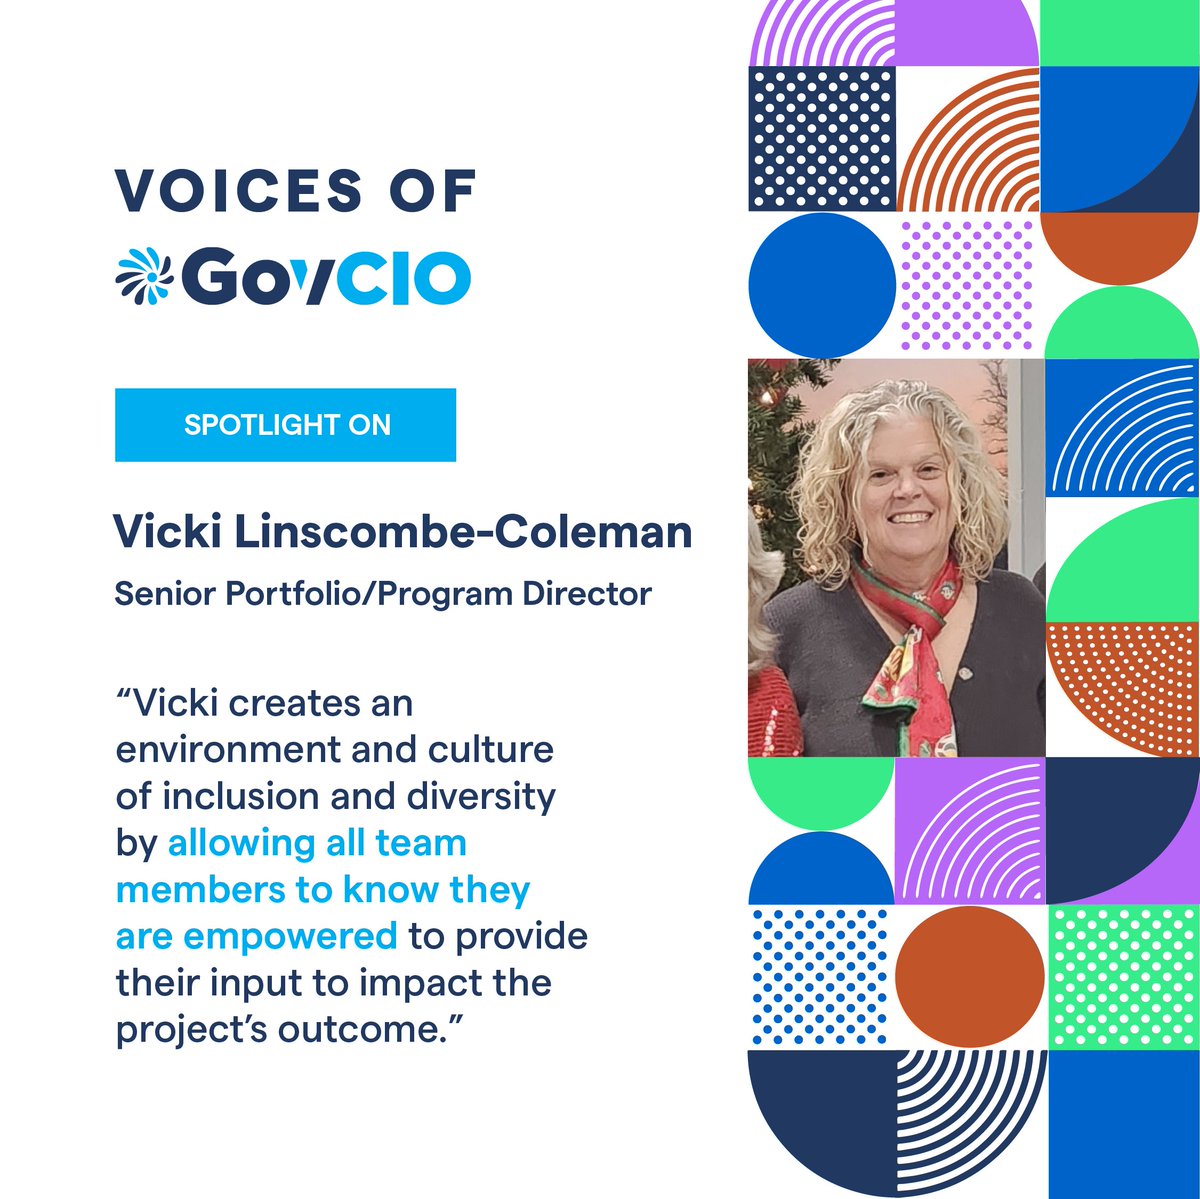 Join us as we celebrate diversity and champion those who are leading the way with #VoicesofGovCIO! ✨

Meet Vicki Linscombe-Coleman, who fosters an inclusive environment for all. Stay tuned for more insights throughout #DiversityMonth! 👏 🎉

Learn more: govcio.social/3VGlu8w